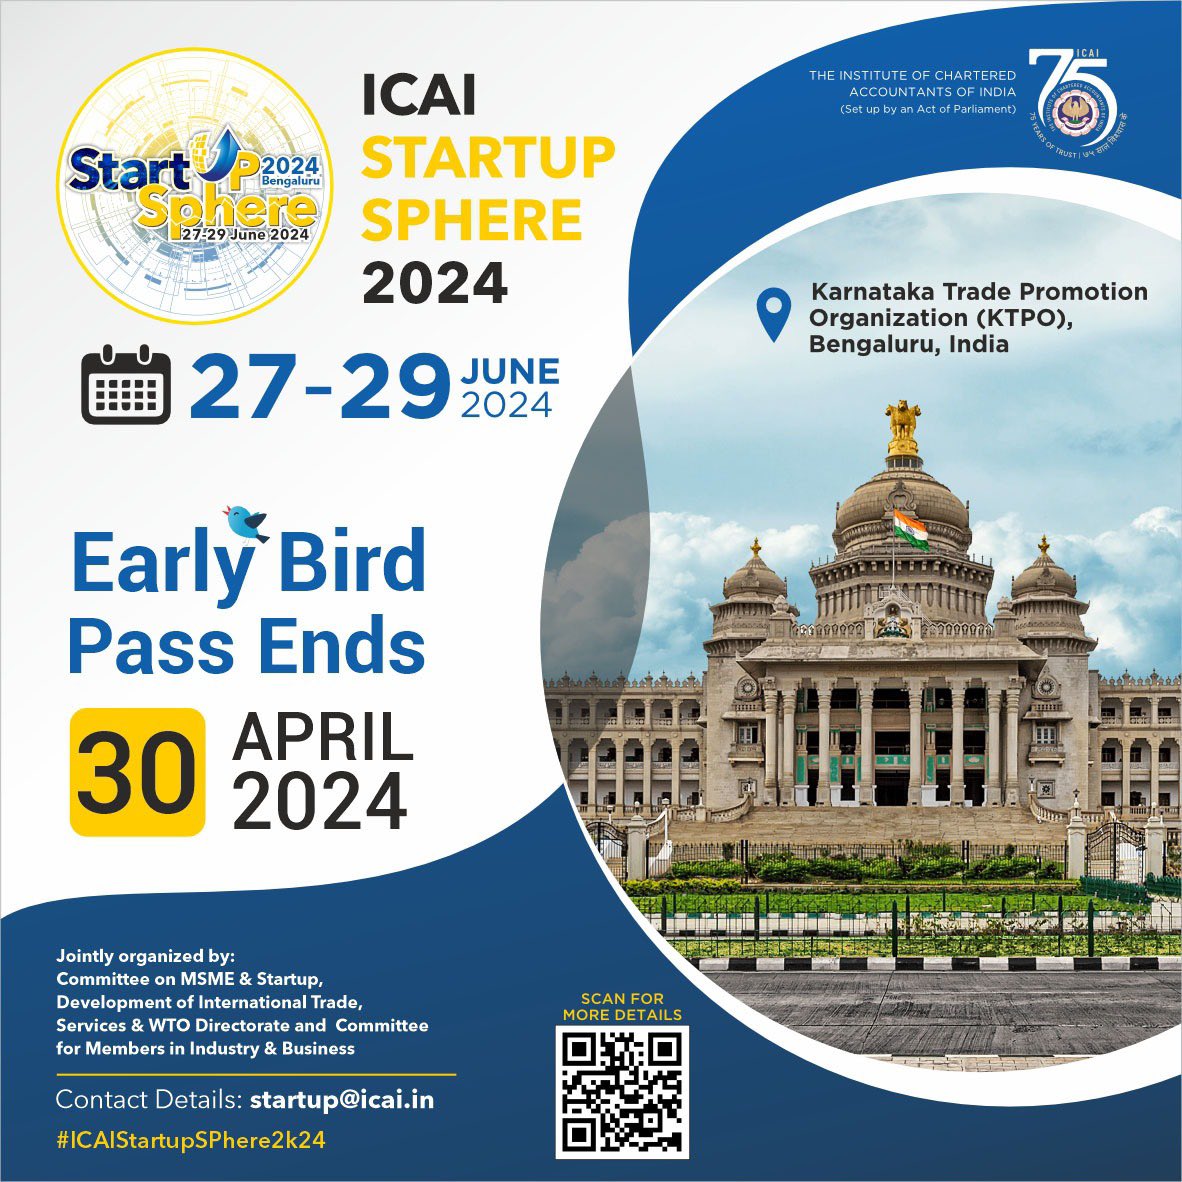 Attention all startup enthusiasts! Don't miss out on the chance to be a part of the *ICAI Startup Sphere 2024*, the biggest event on startups *Grab the Early Bird Discount* before it flies away! Register yourself *by 30th April for just Rs. 5000+ GST*(For CA Member Delegate),